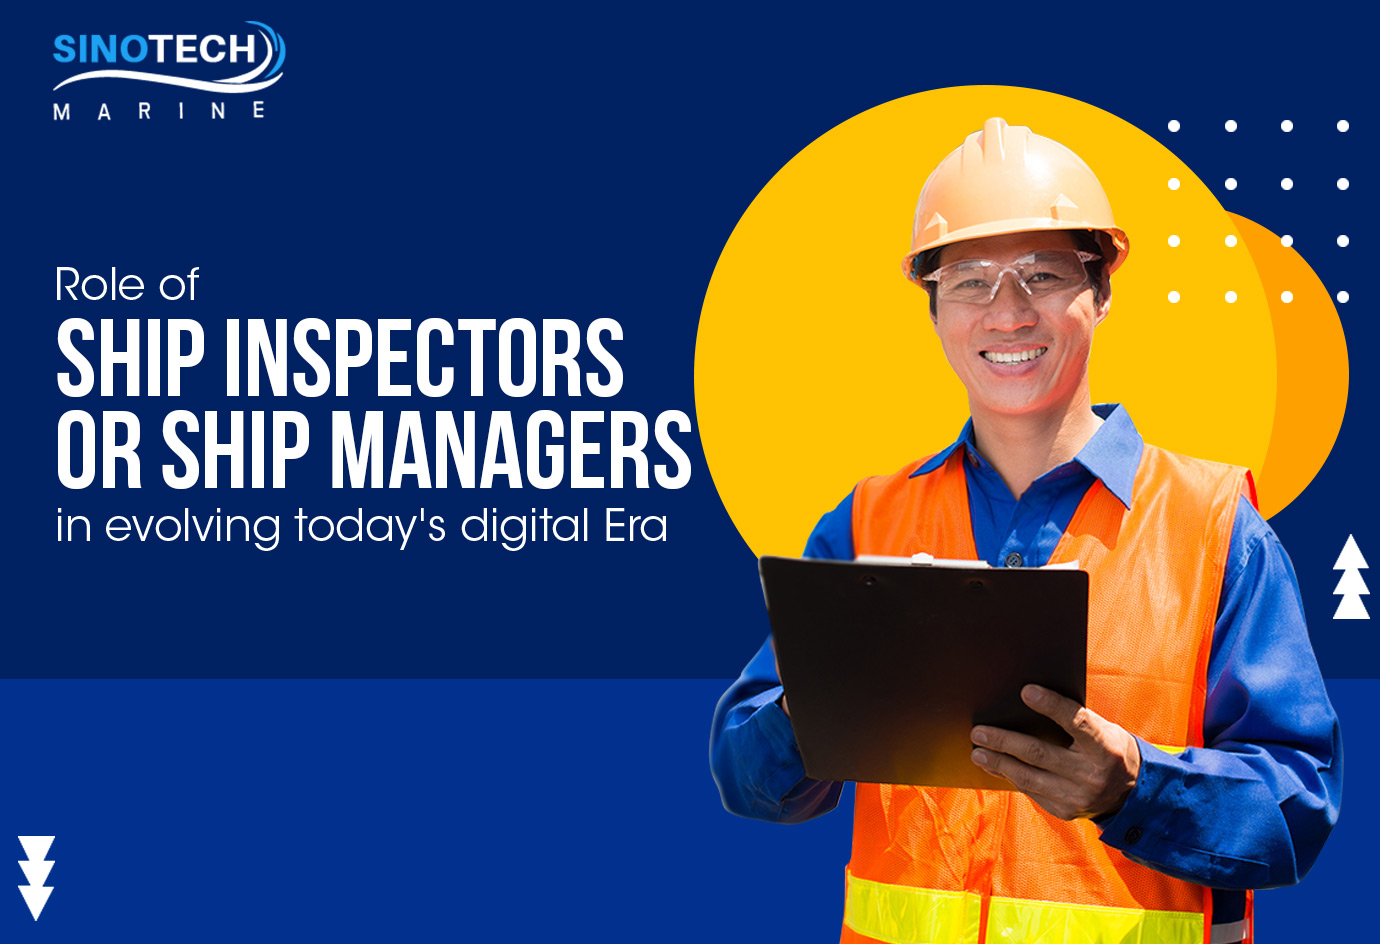 Here’s How the Role Of A Ship Inspector Has Evolved In the Digital Era